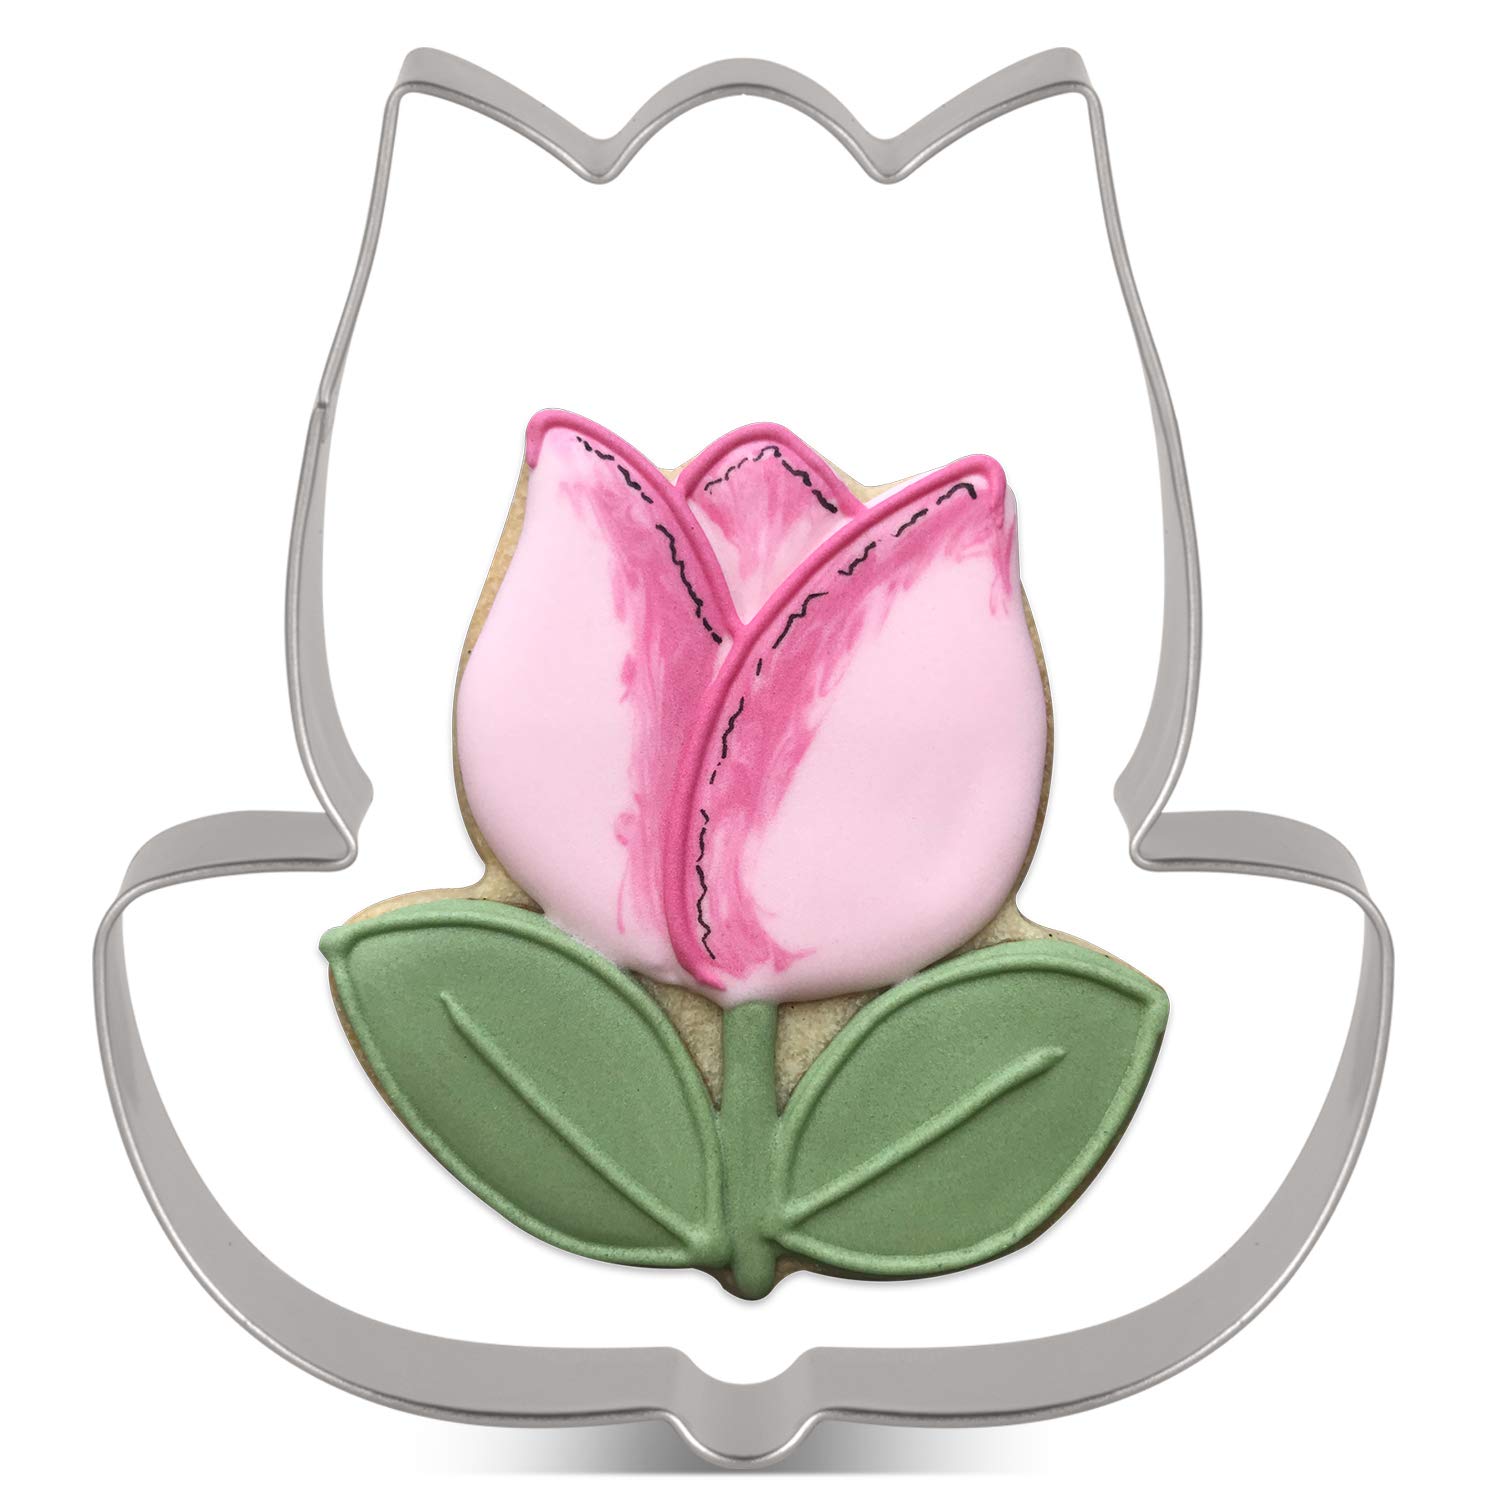 LILIAO Tulip Flower Cookie Cutter - 3.4 x 3.7 inches - Stainless Steel